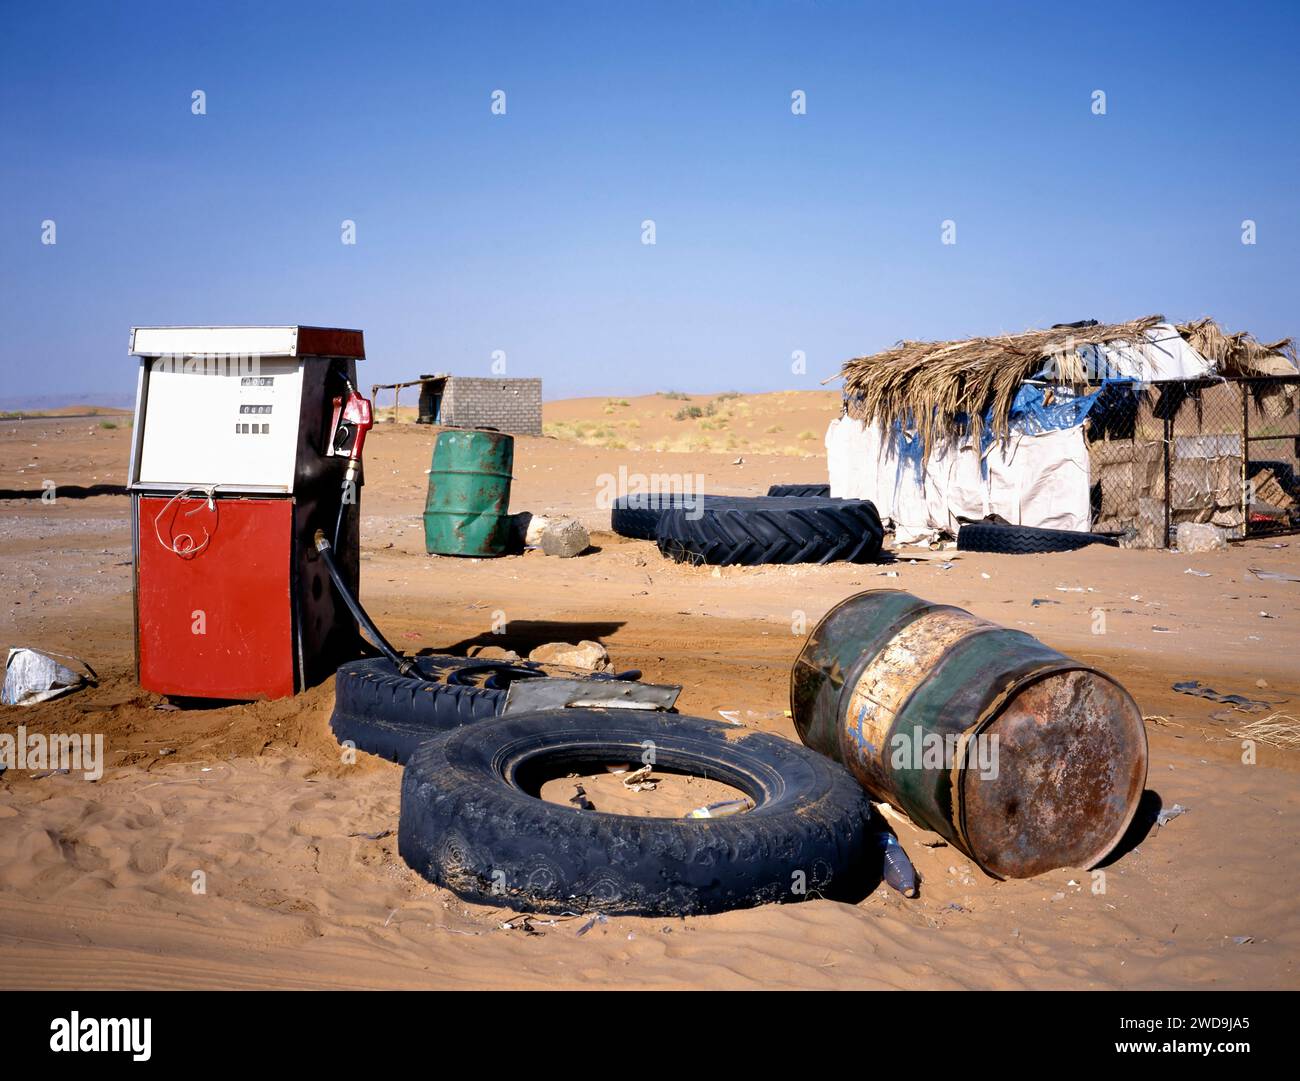 An abandoned old gas station at the border of the Arab desert in Yemen Stock Photo